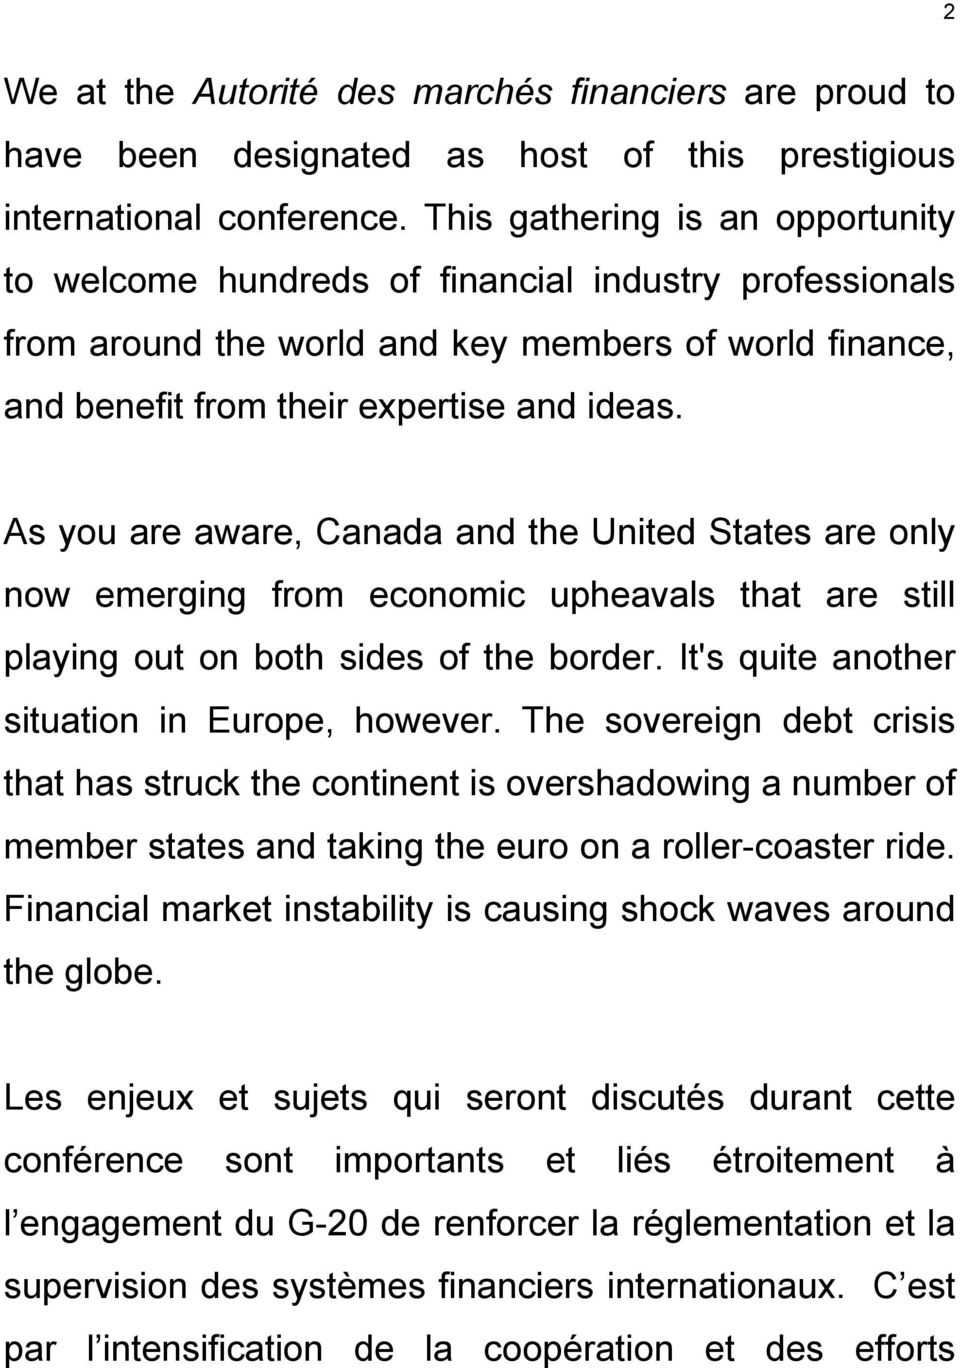 As you are aware, Canada and the United States are only now emerging from economic upheavals that are still playing out on both sides of the border. It's quite another situation in Europe, however.